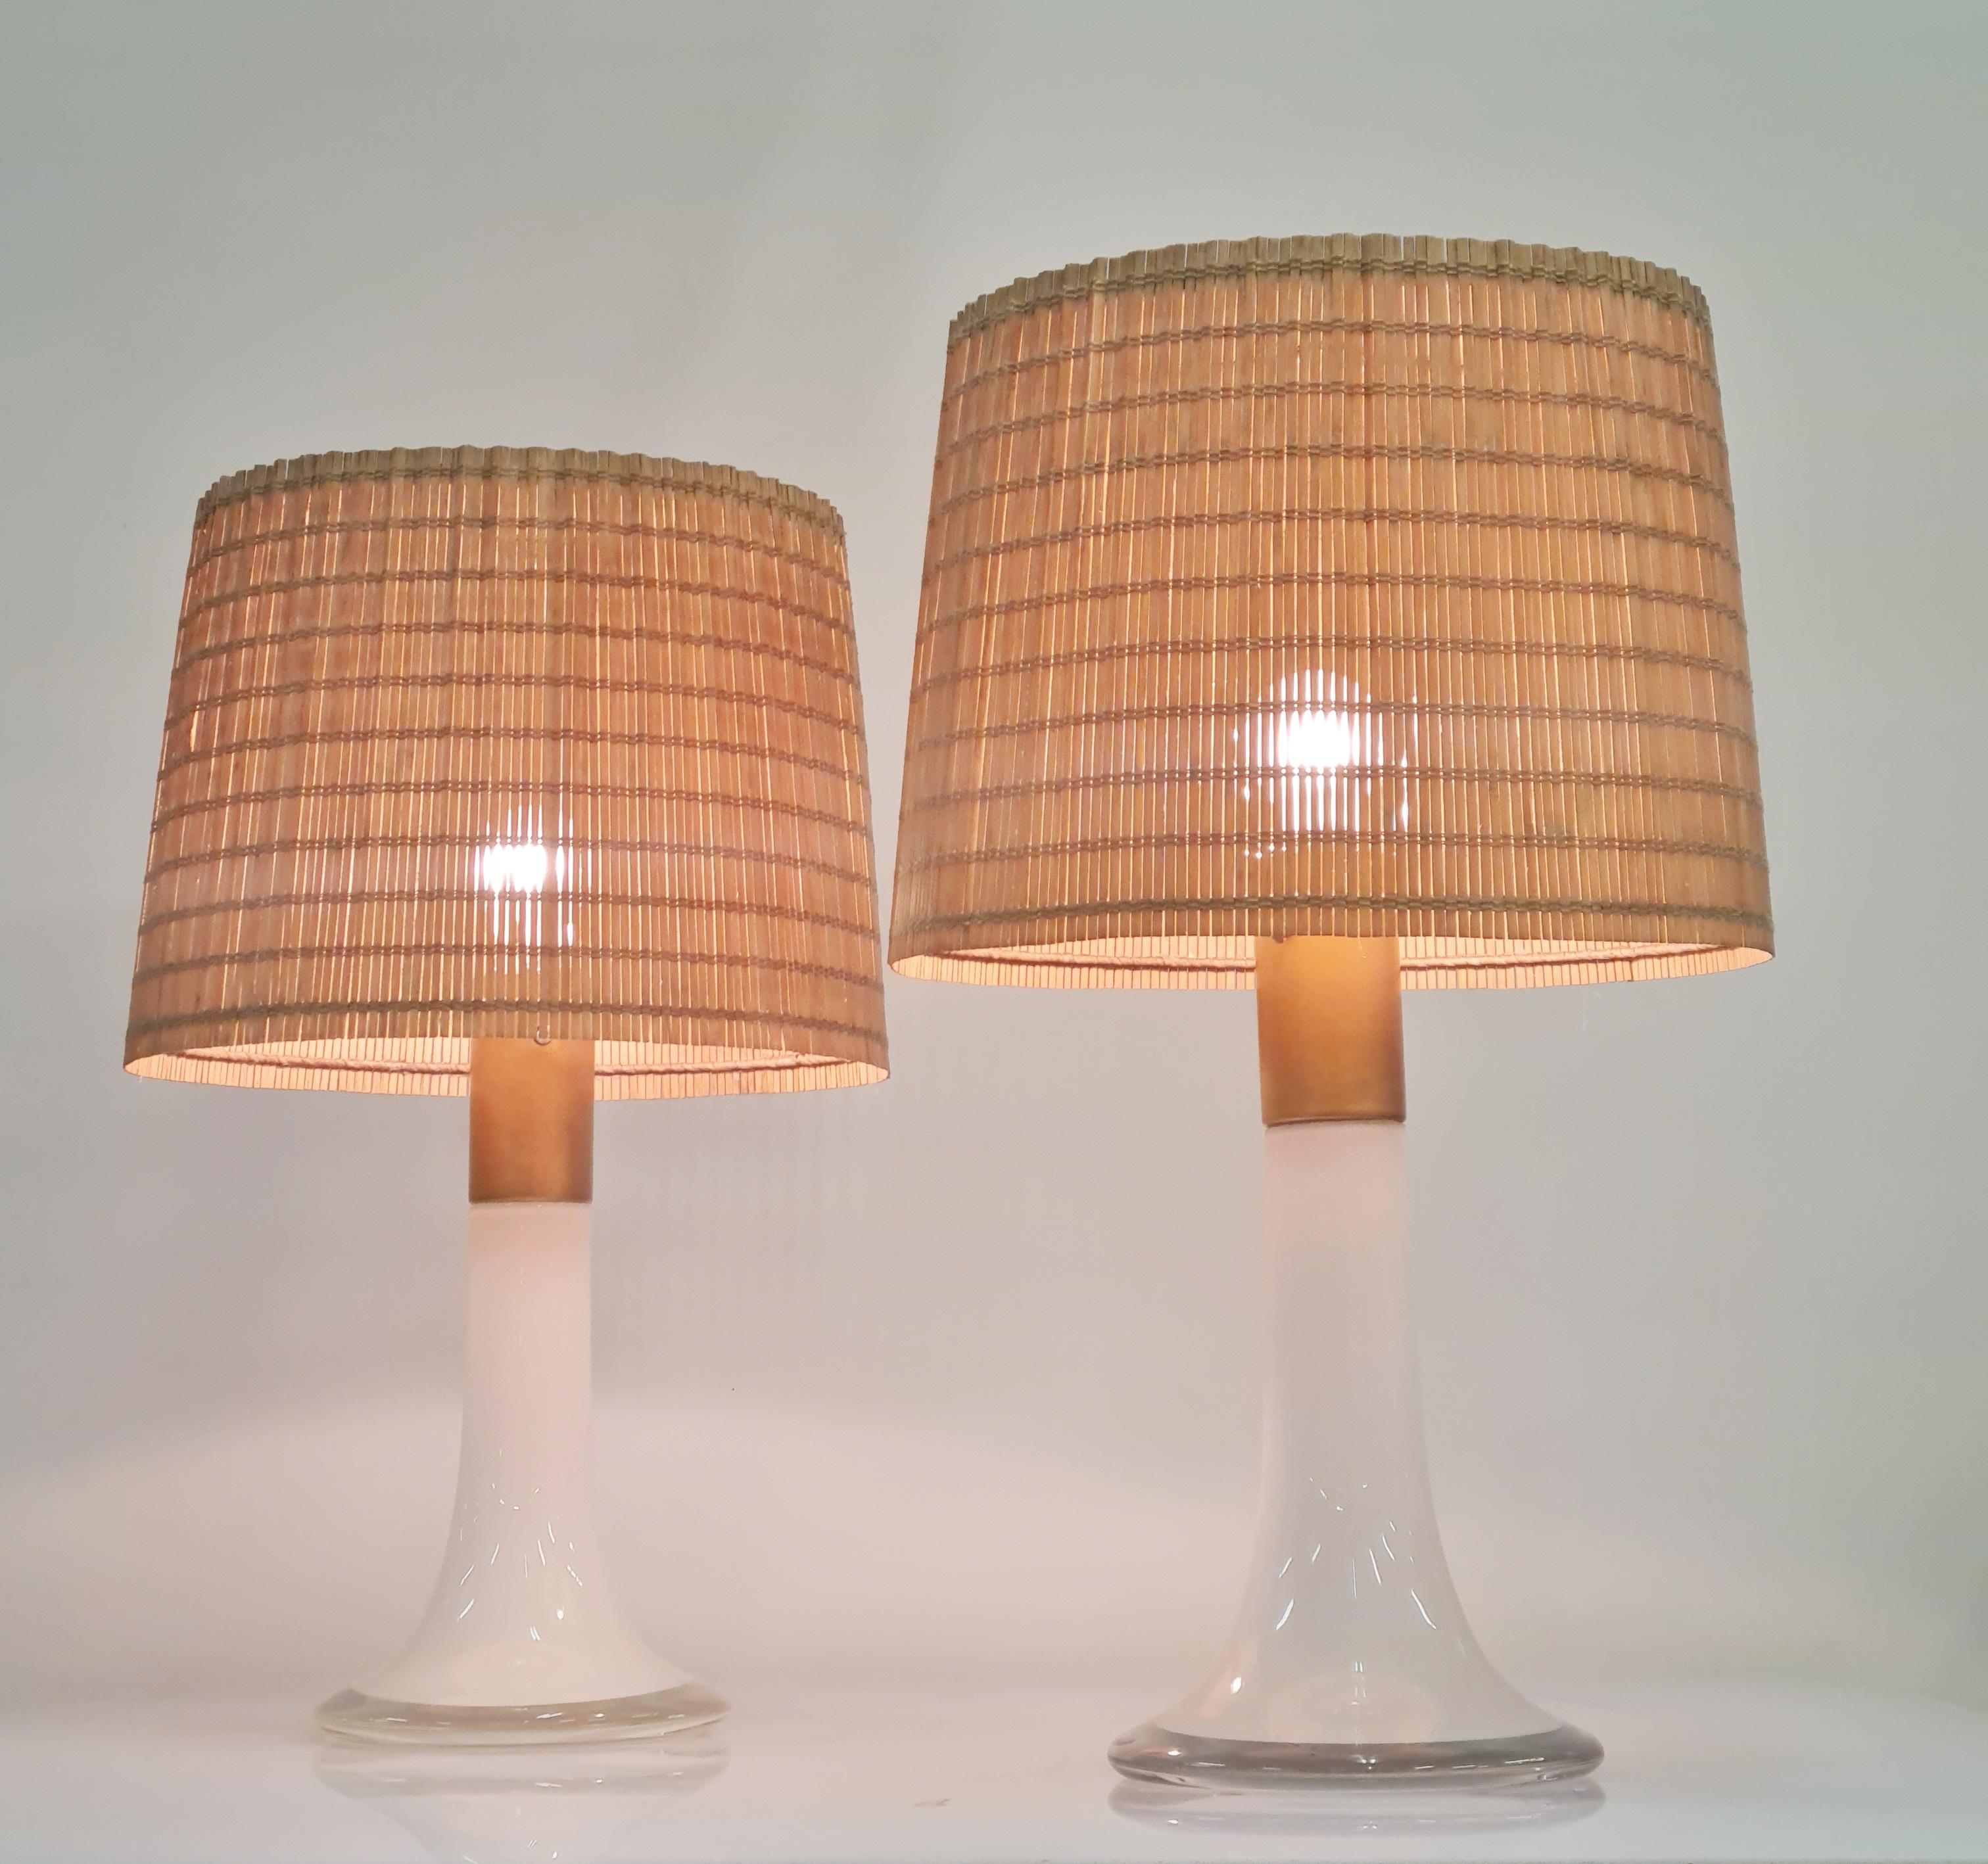 Lisa Johansson Pape Pair of Table Lamps Model 46-017, Orno 1960s In Good Condition For Sale In Helsinki, FI